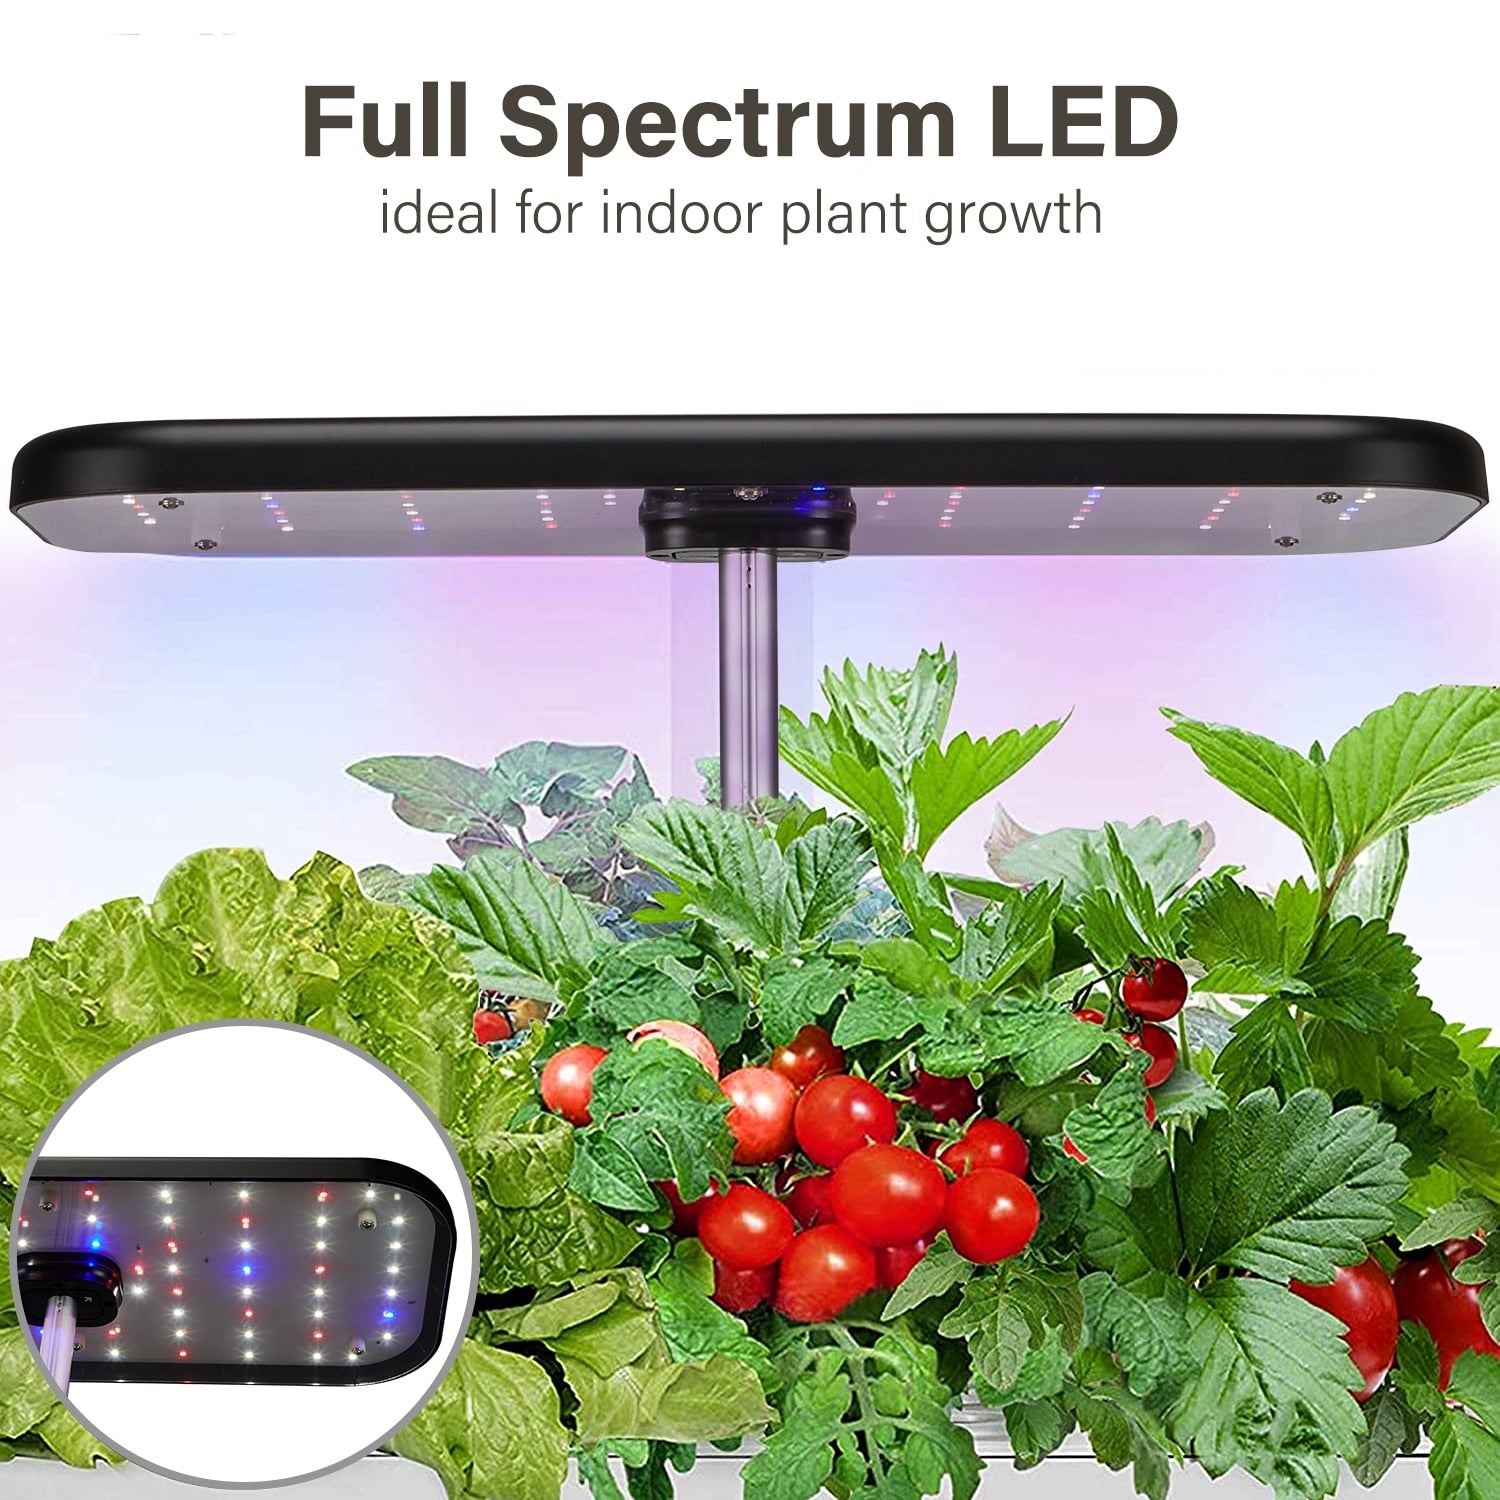 INKBIRD LED Grow Light Hydroponics Growing System Panel Height Adjustable Full Spectrum Sunlight All Year For Greenhouse Plants